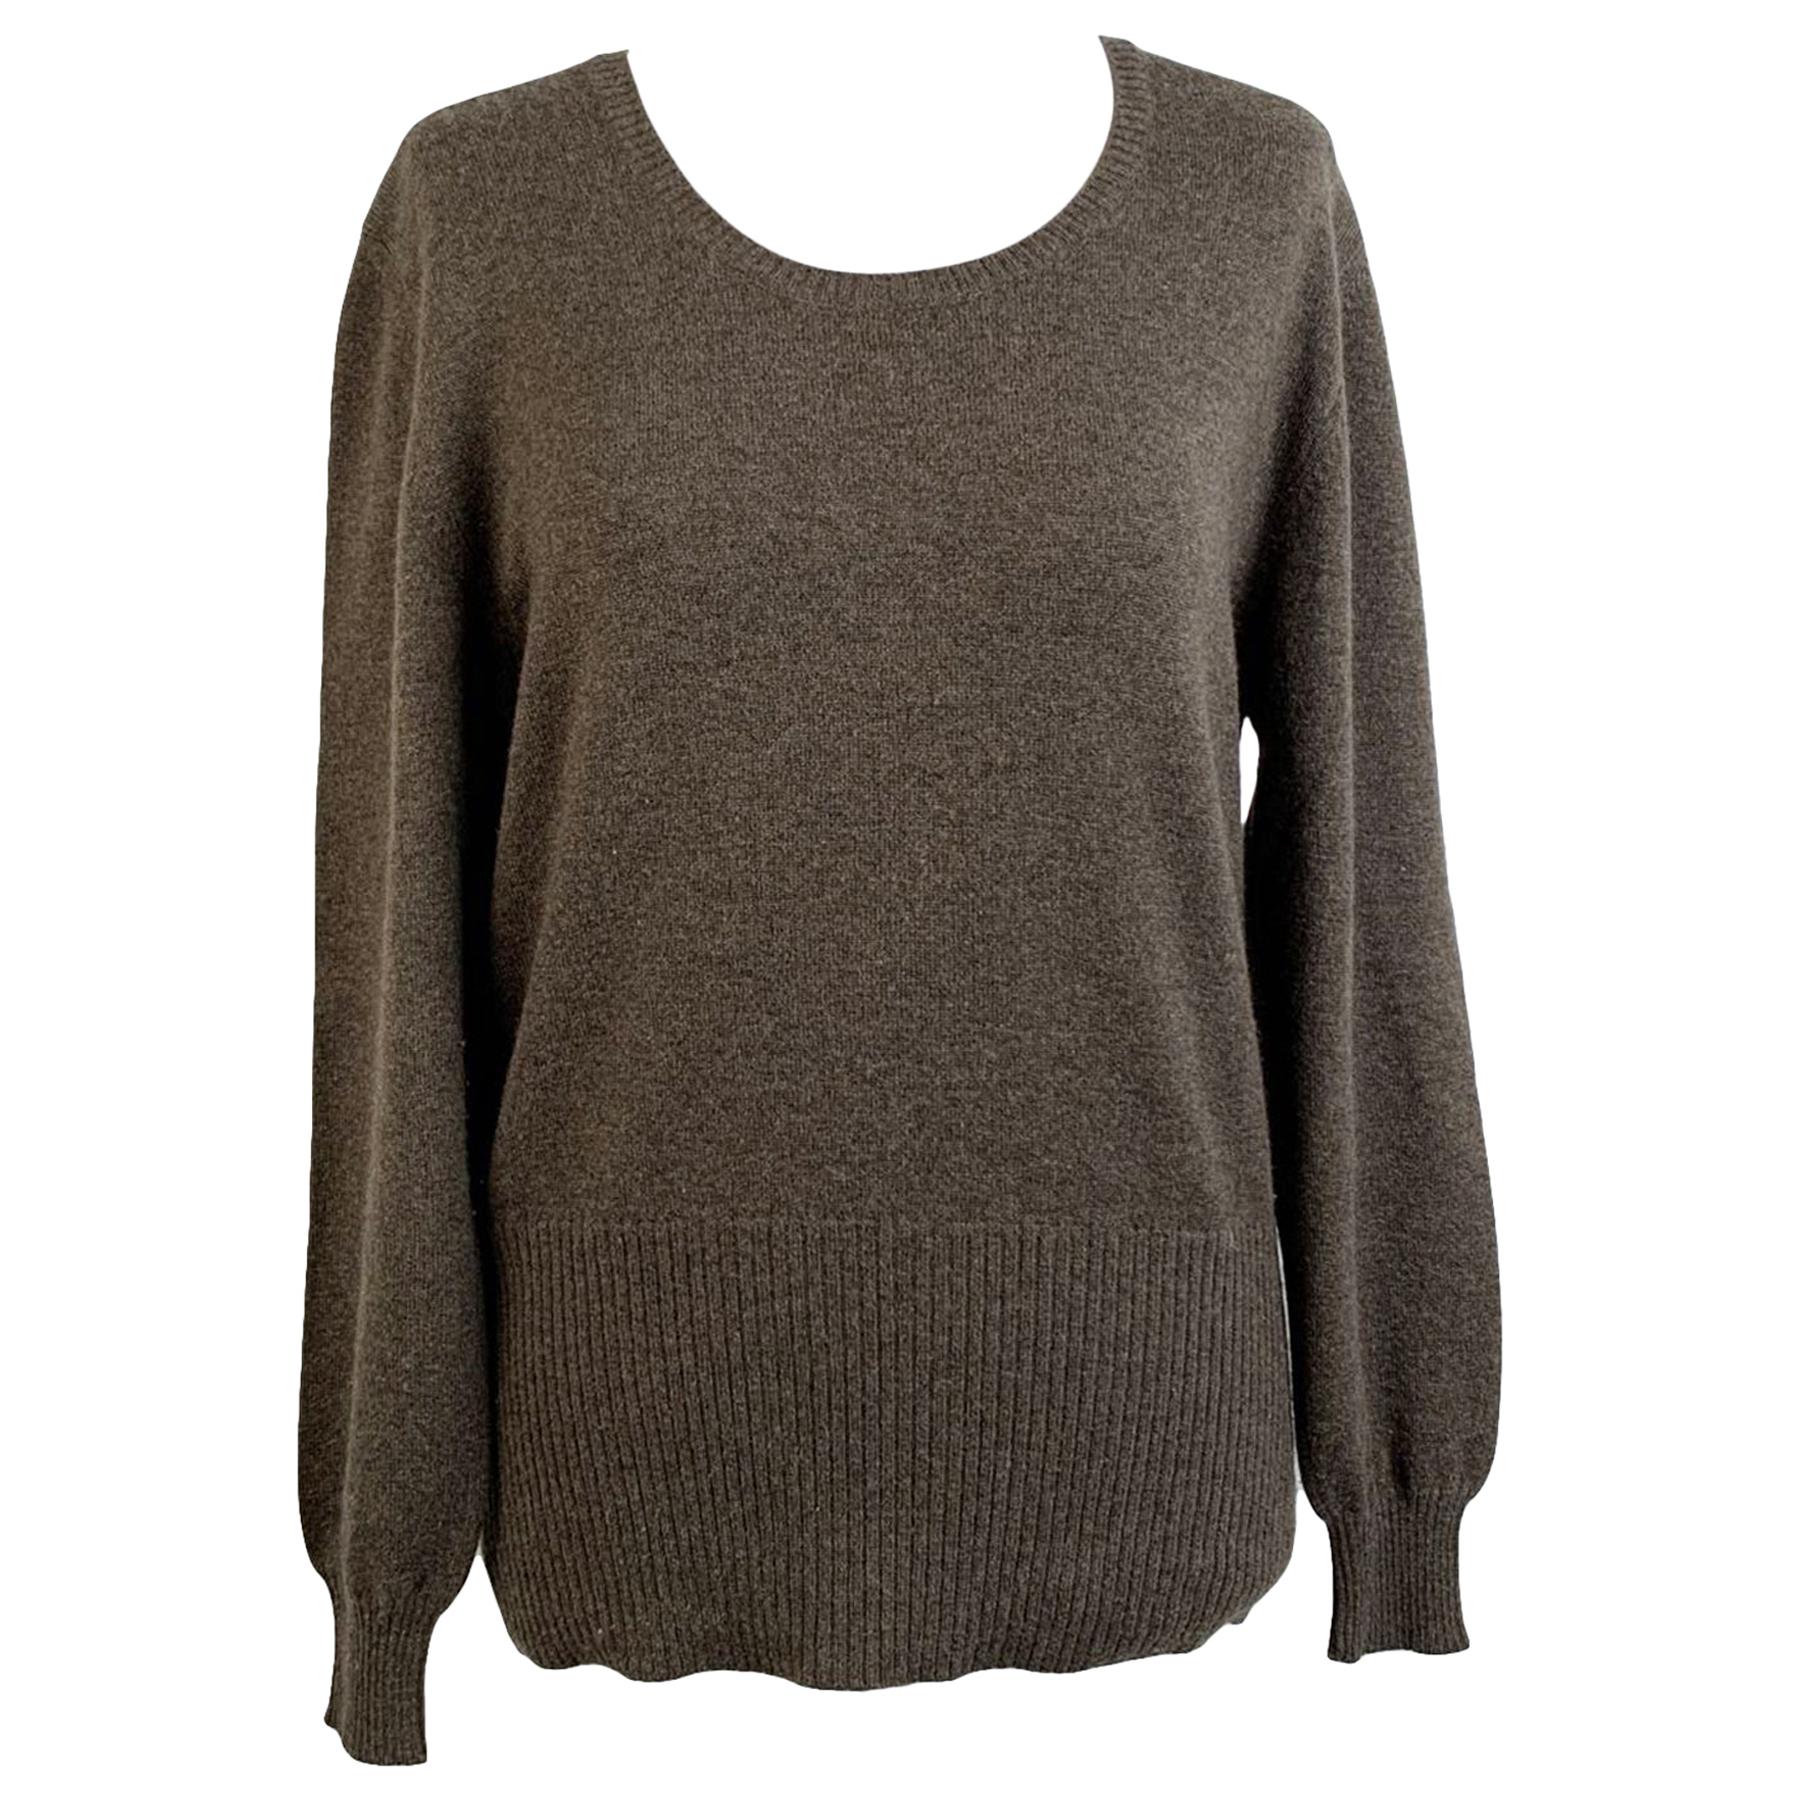 Malo Brown Cashmere Knit Jumper Sweater Size 46